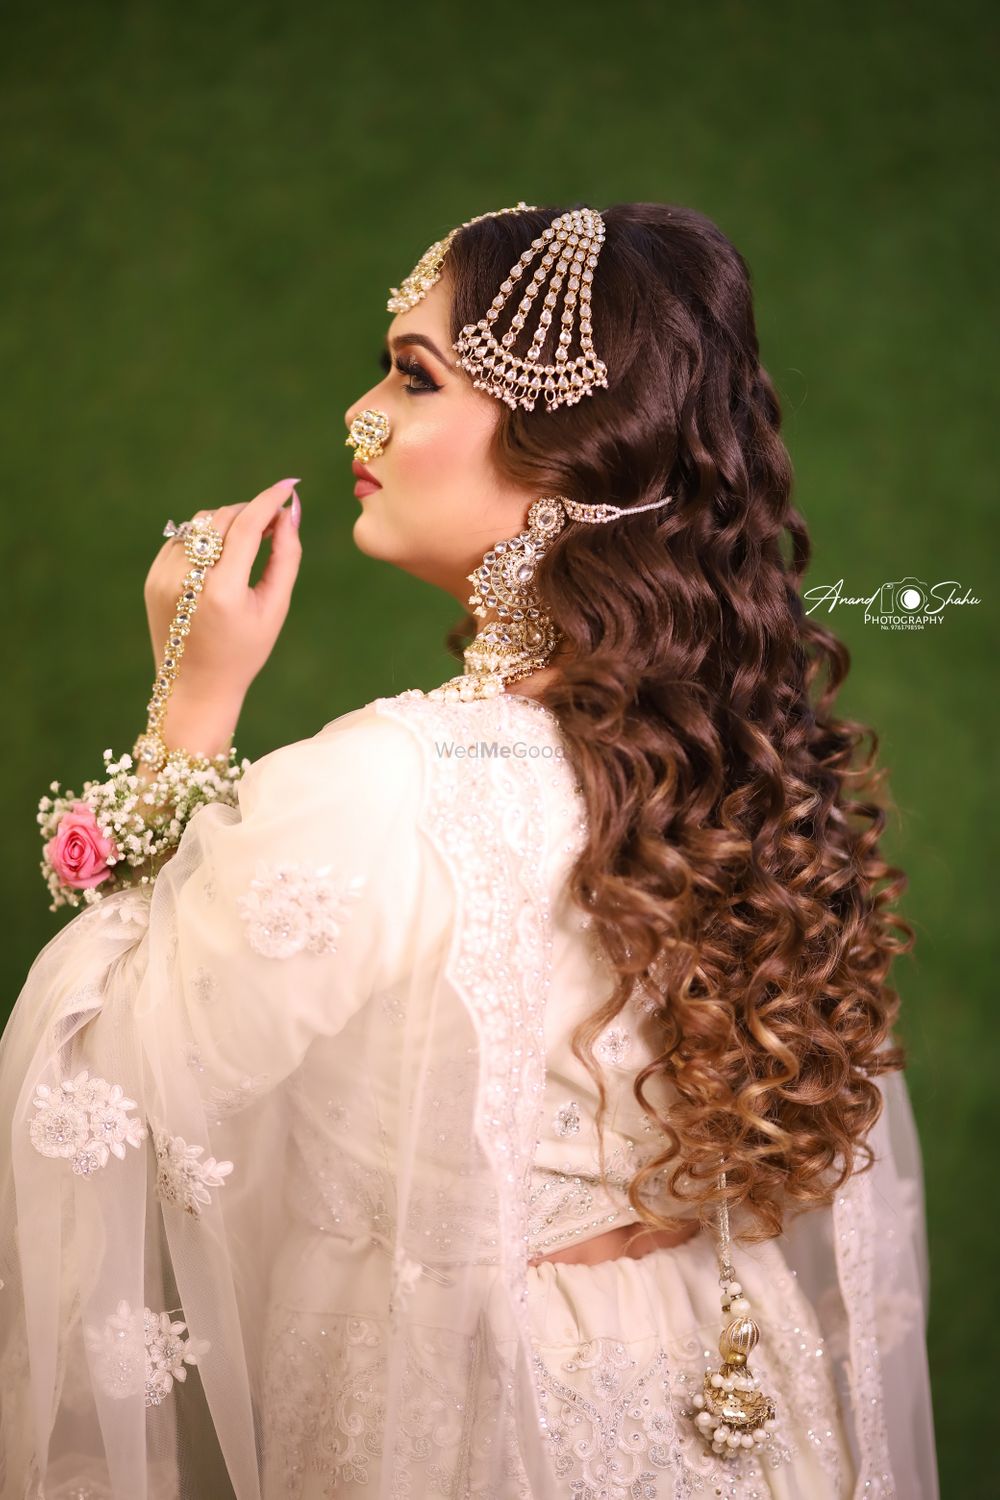 Photo From My work - By Sadaf Khan Makeup And Hair Artist